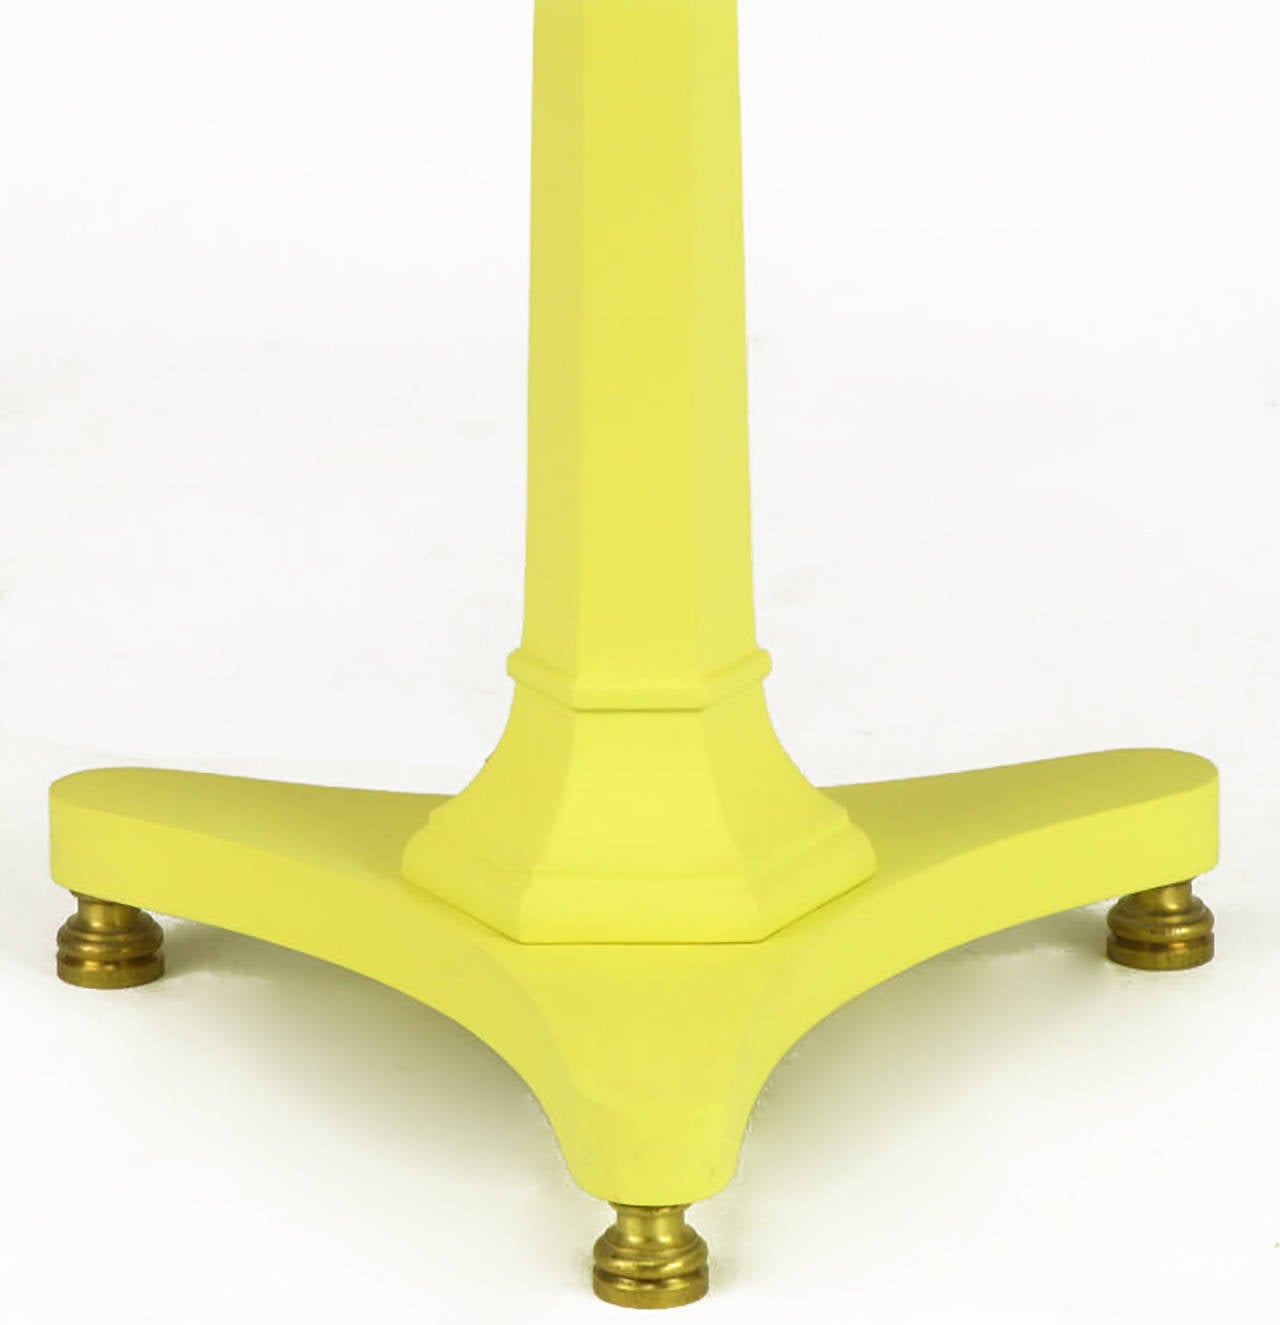 Mid-20th Century Yellow Lacquered Wood and Brass Regency Floor Lamp For Sale